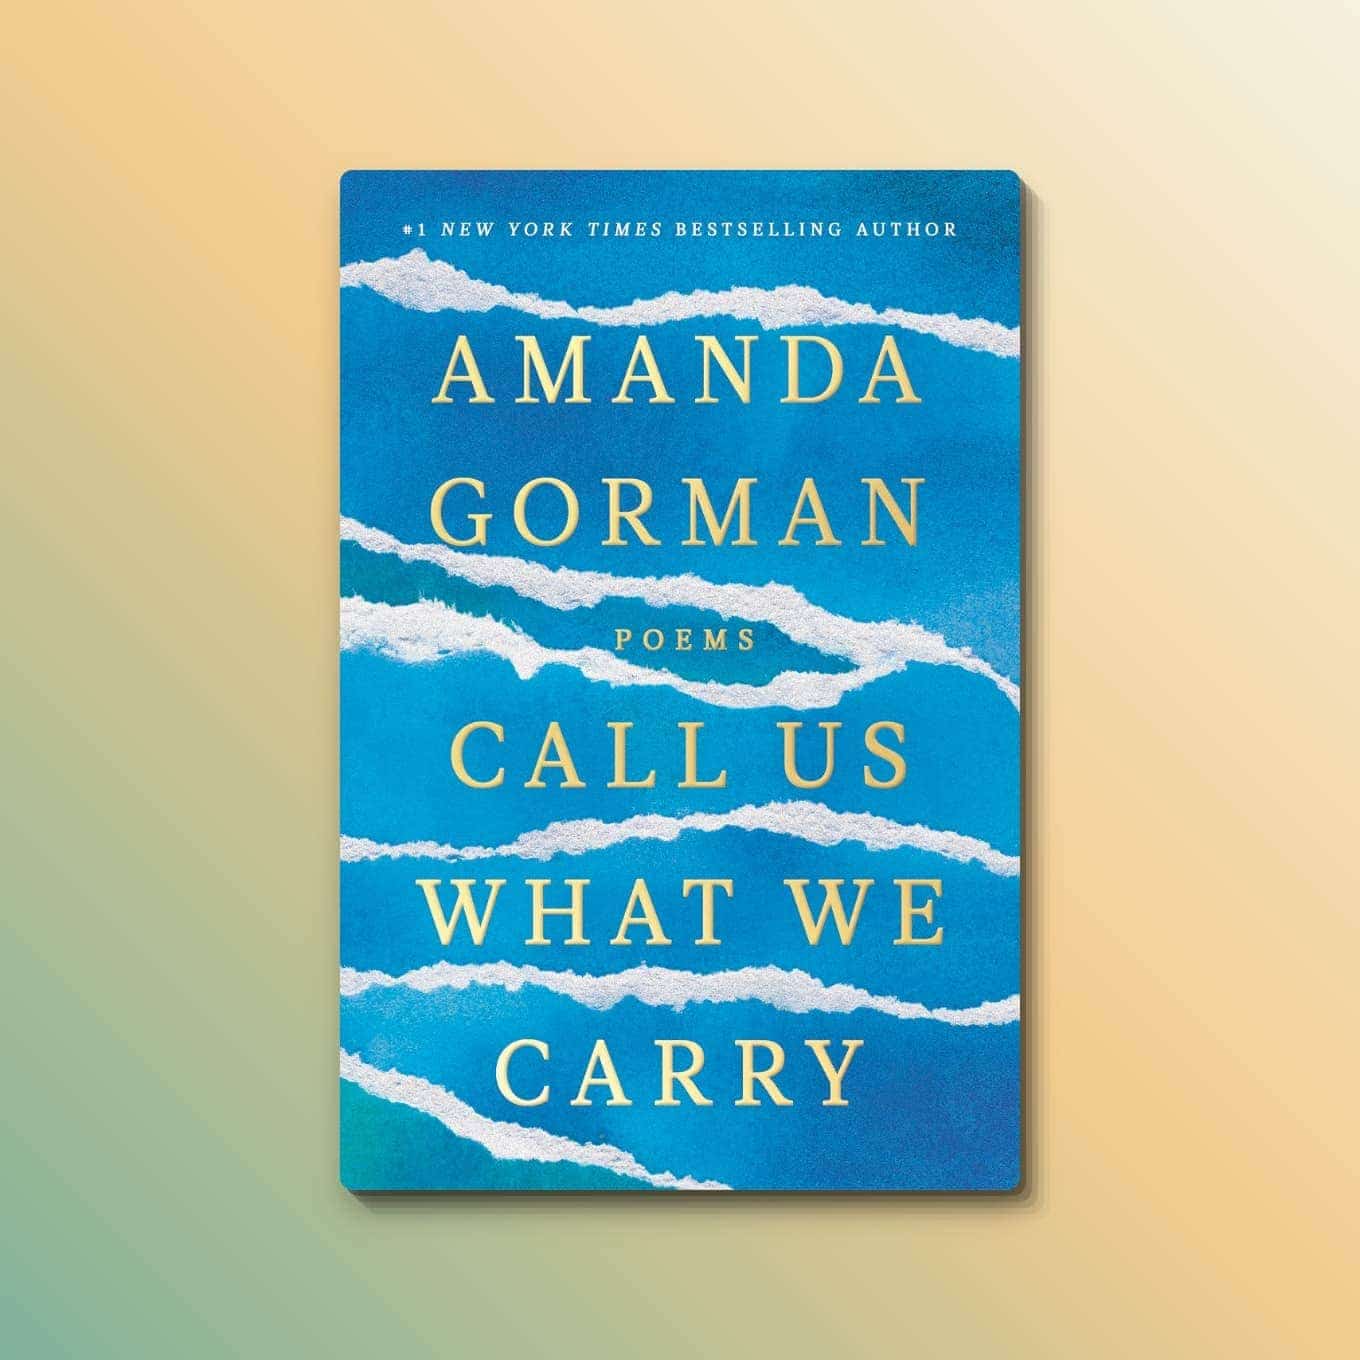 “Call Us What We Carry: Poems” by Amanda Gorman 